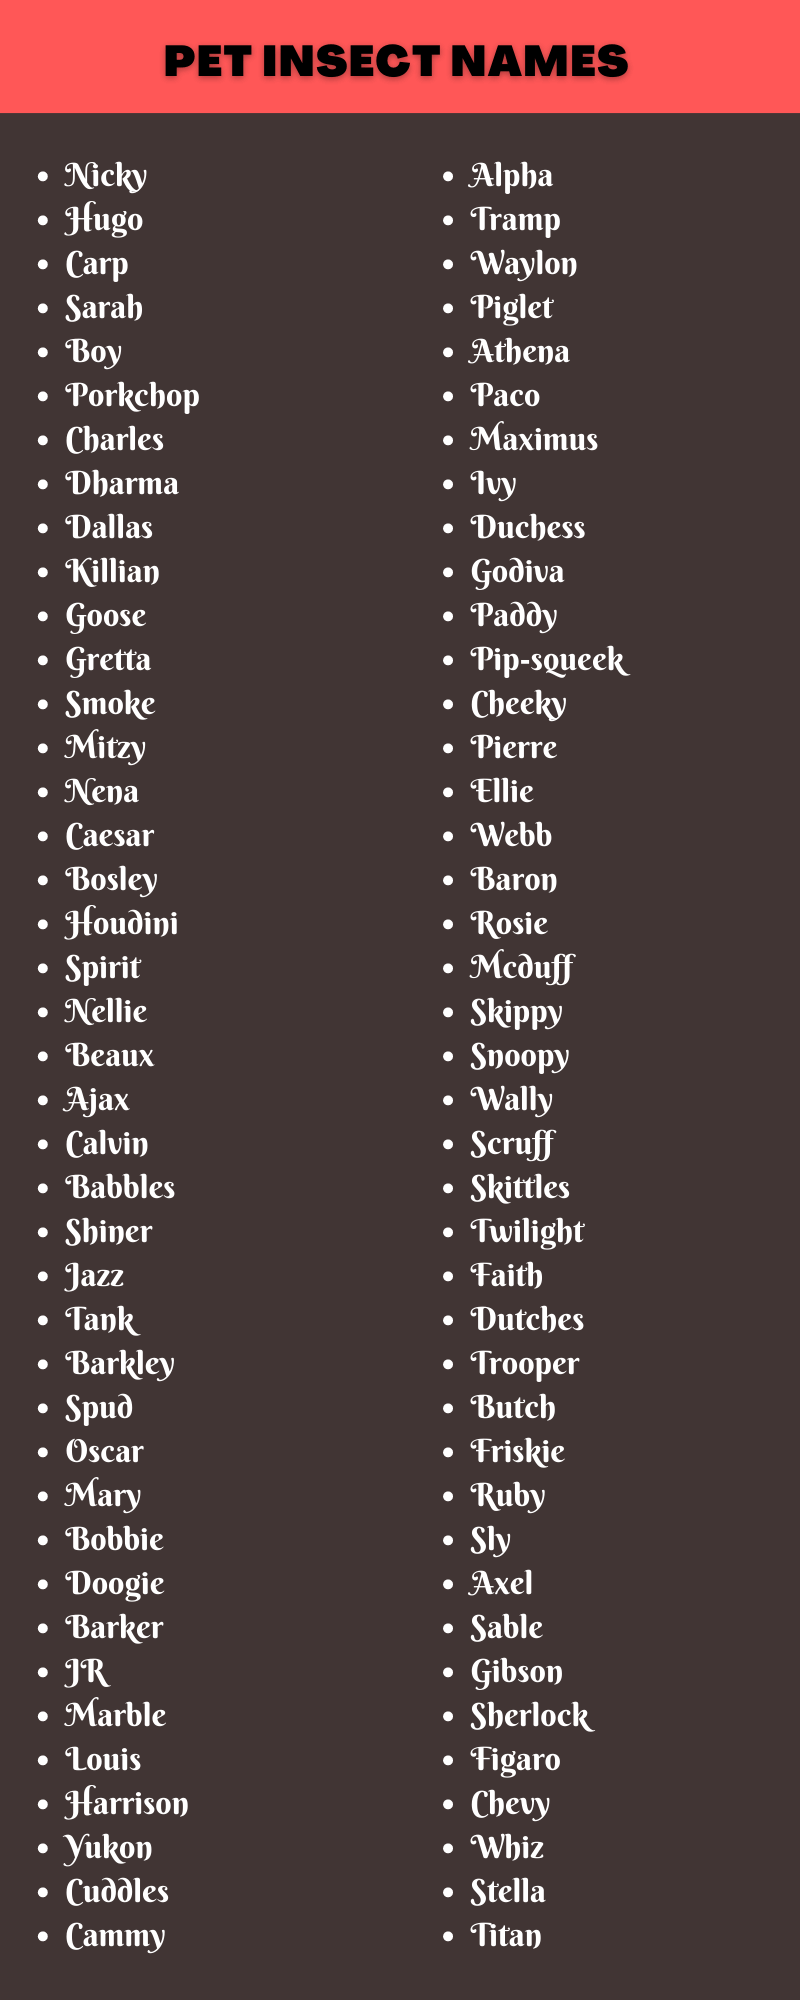 Pet Insect Names